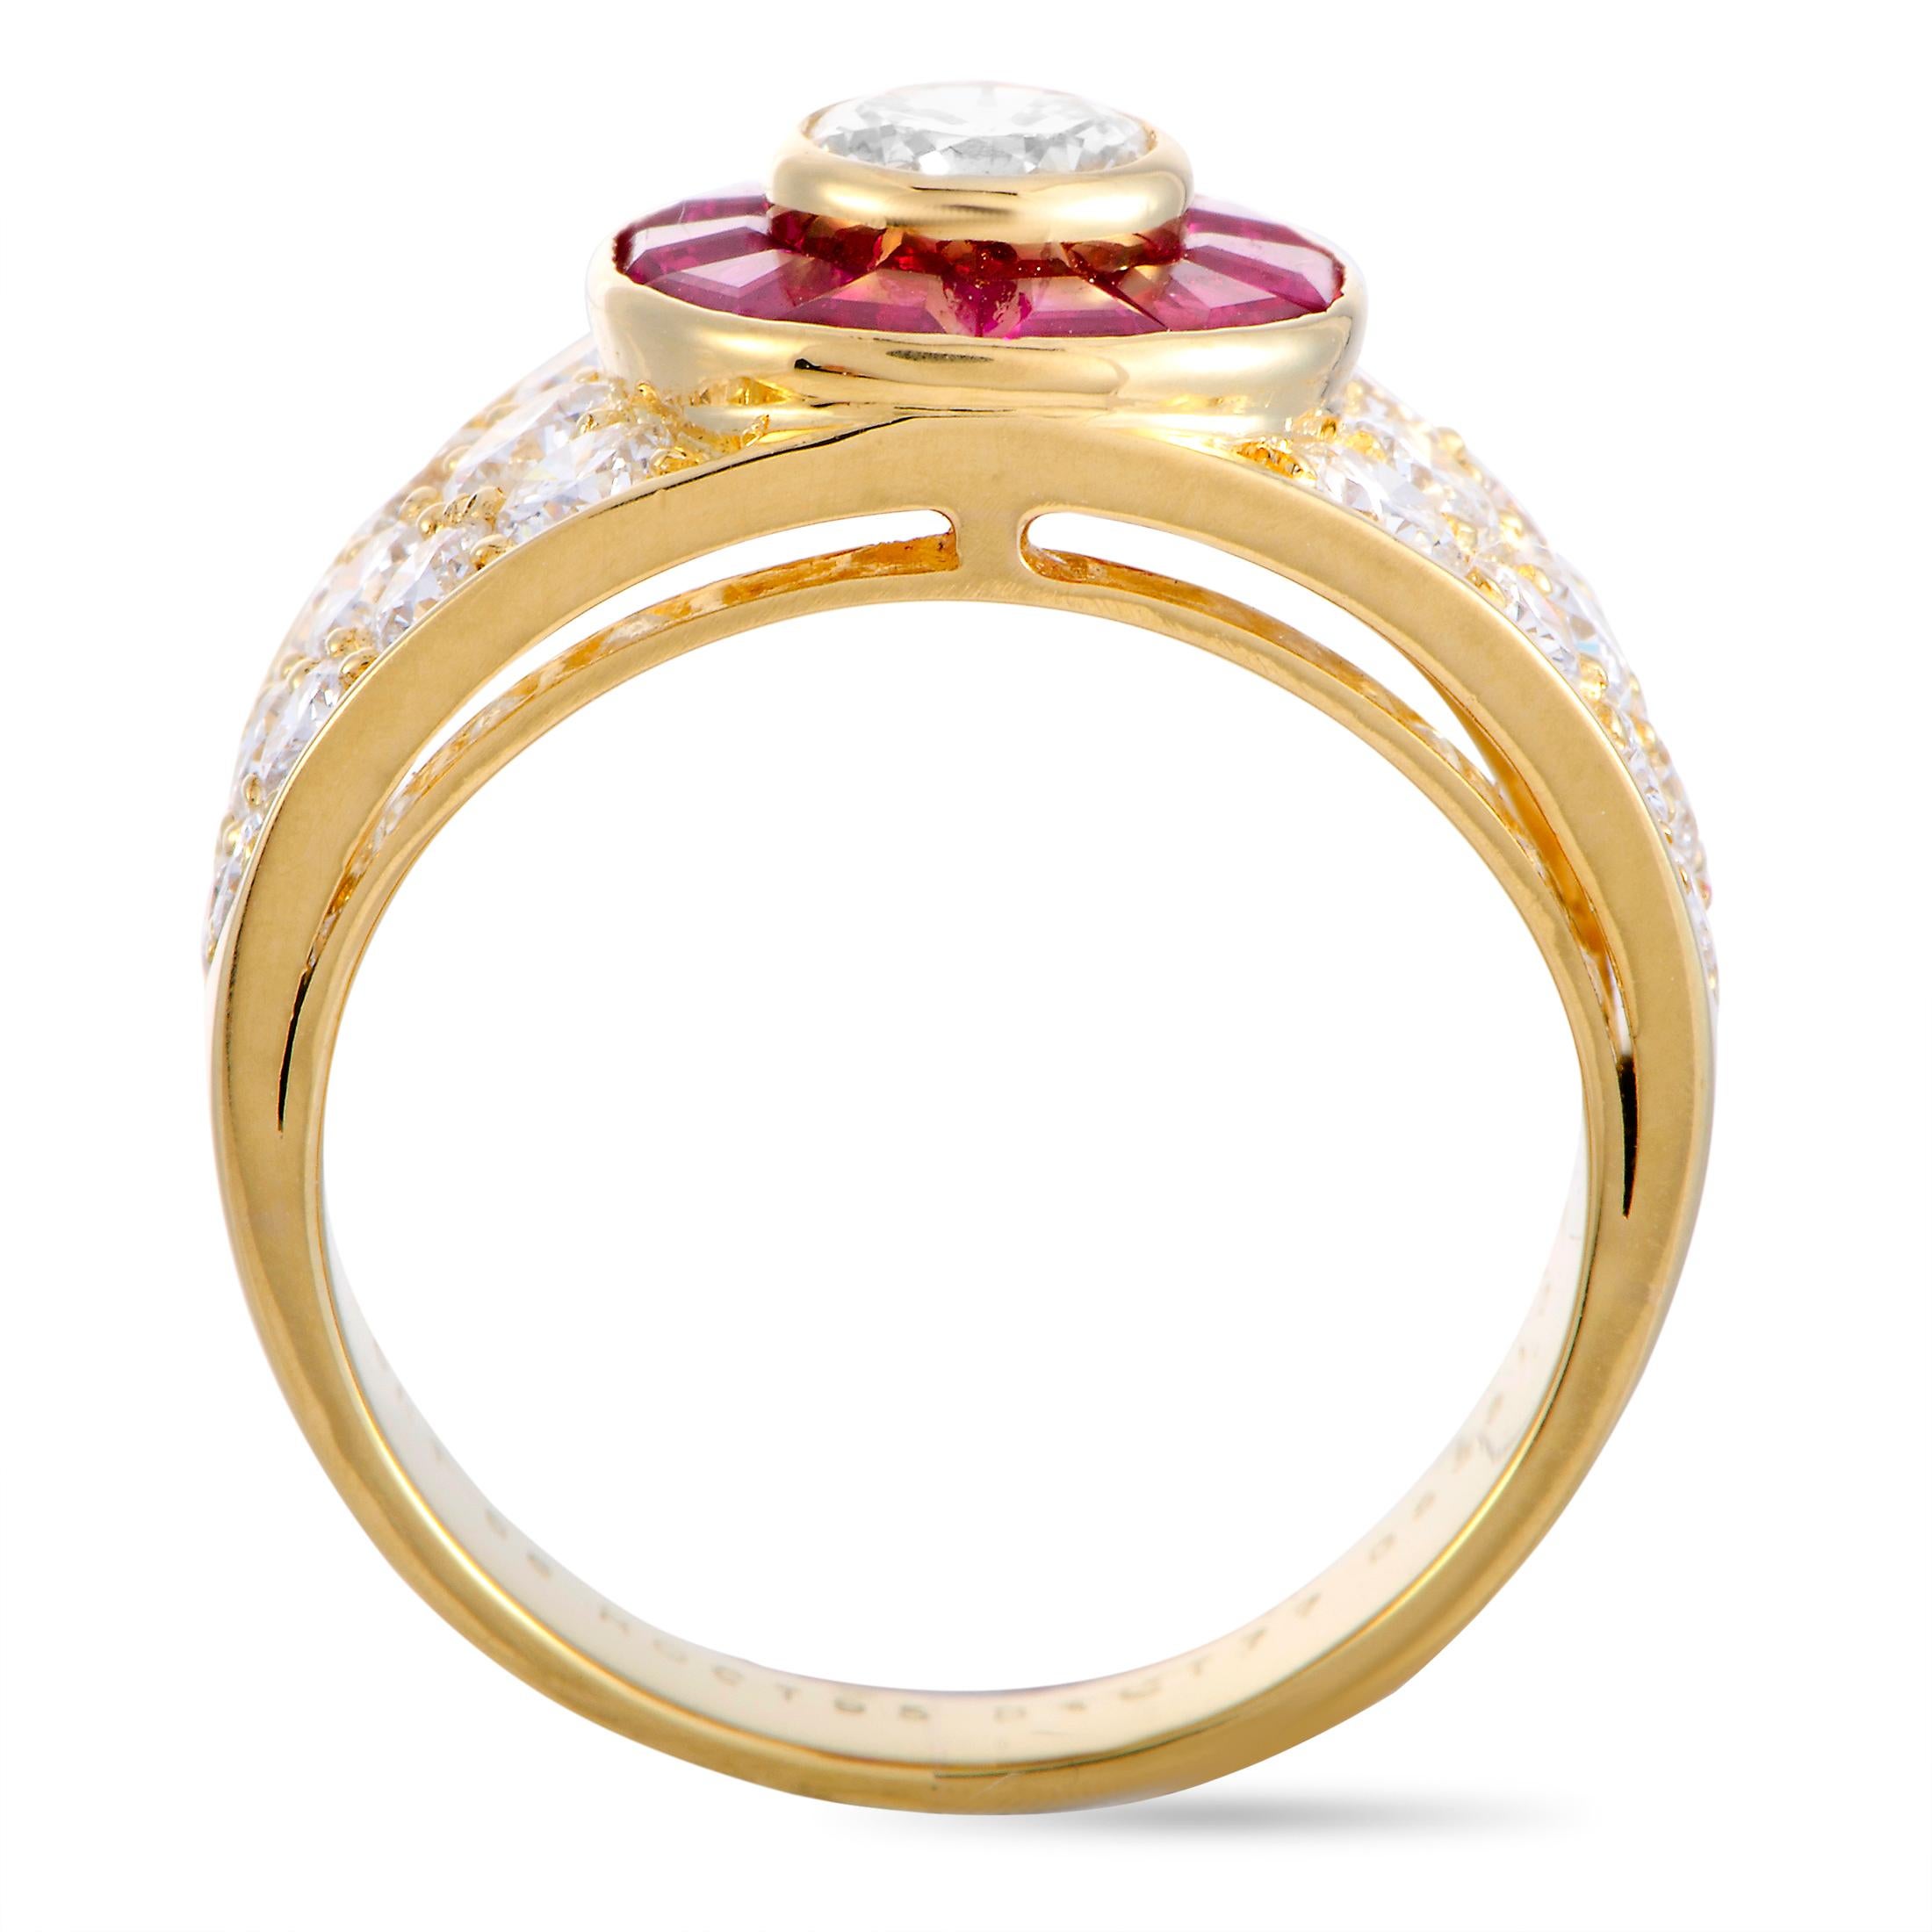 This Van Cleef & Arpels ring is made of 18K yellow gold and weighs 6.5 grams. It is set with a total of 0.95 carats of rubies and a total of 1.77 carats of diamonds featuring grade E color and VVS clarity. The ring boasts band thickness of 4 mm and